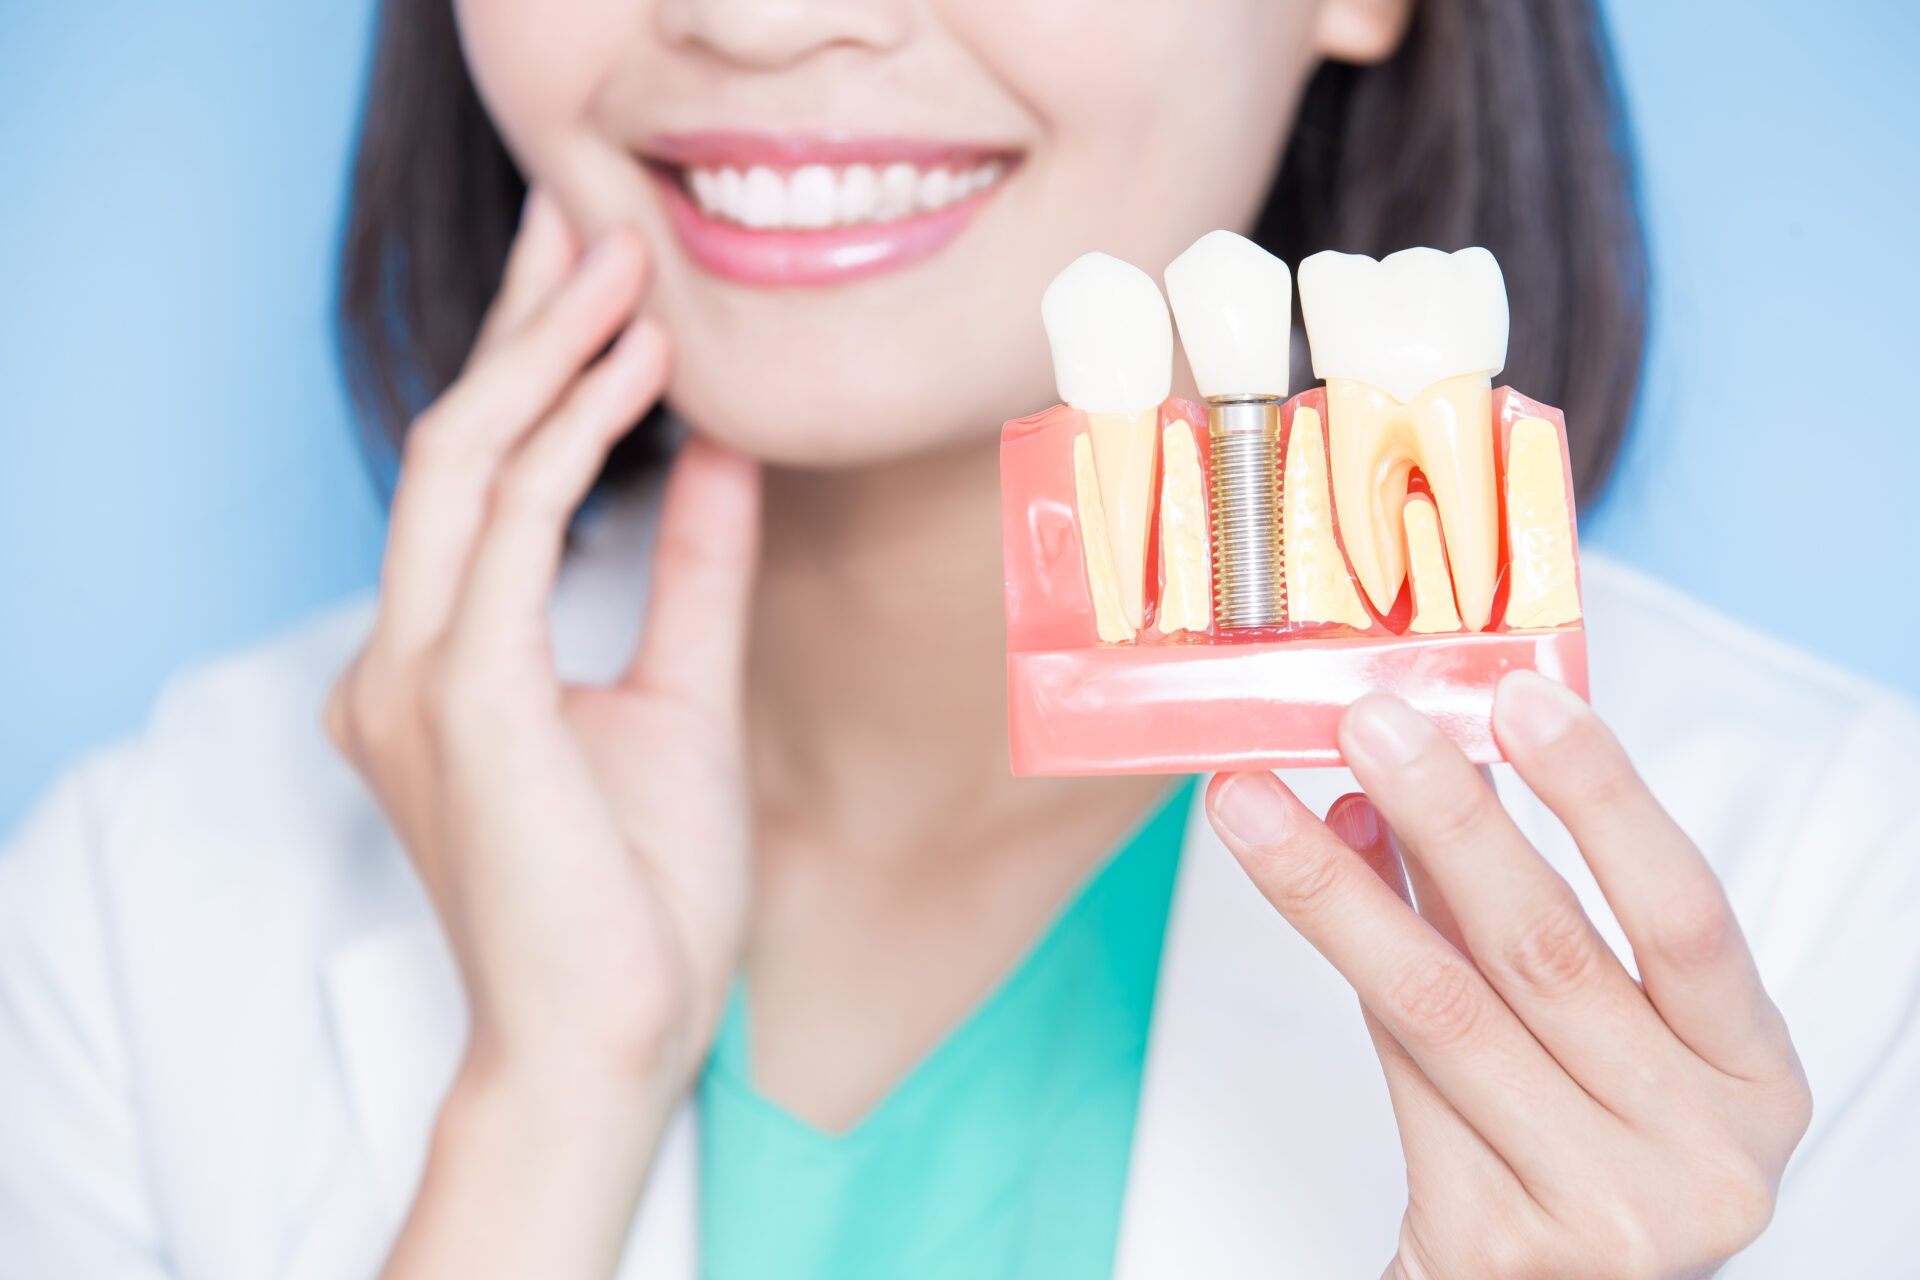 can dental implants be removed and replaced